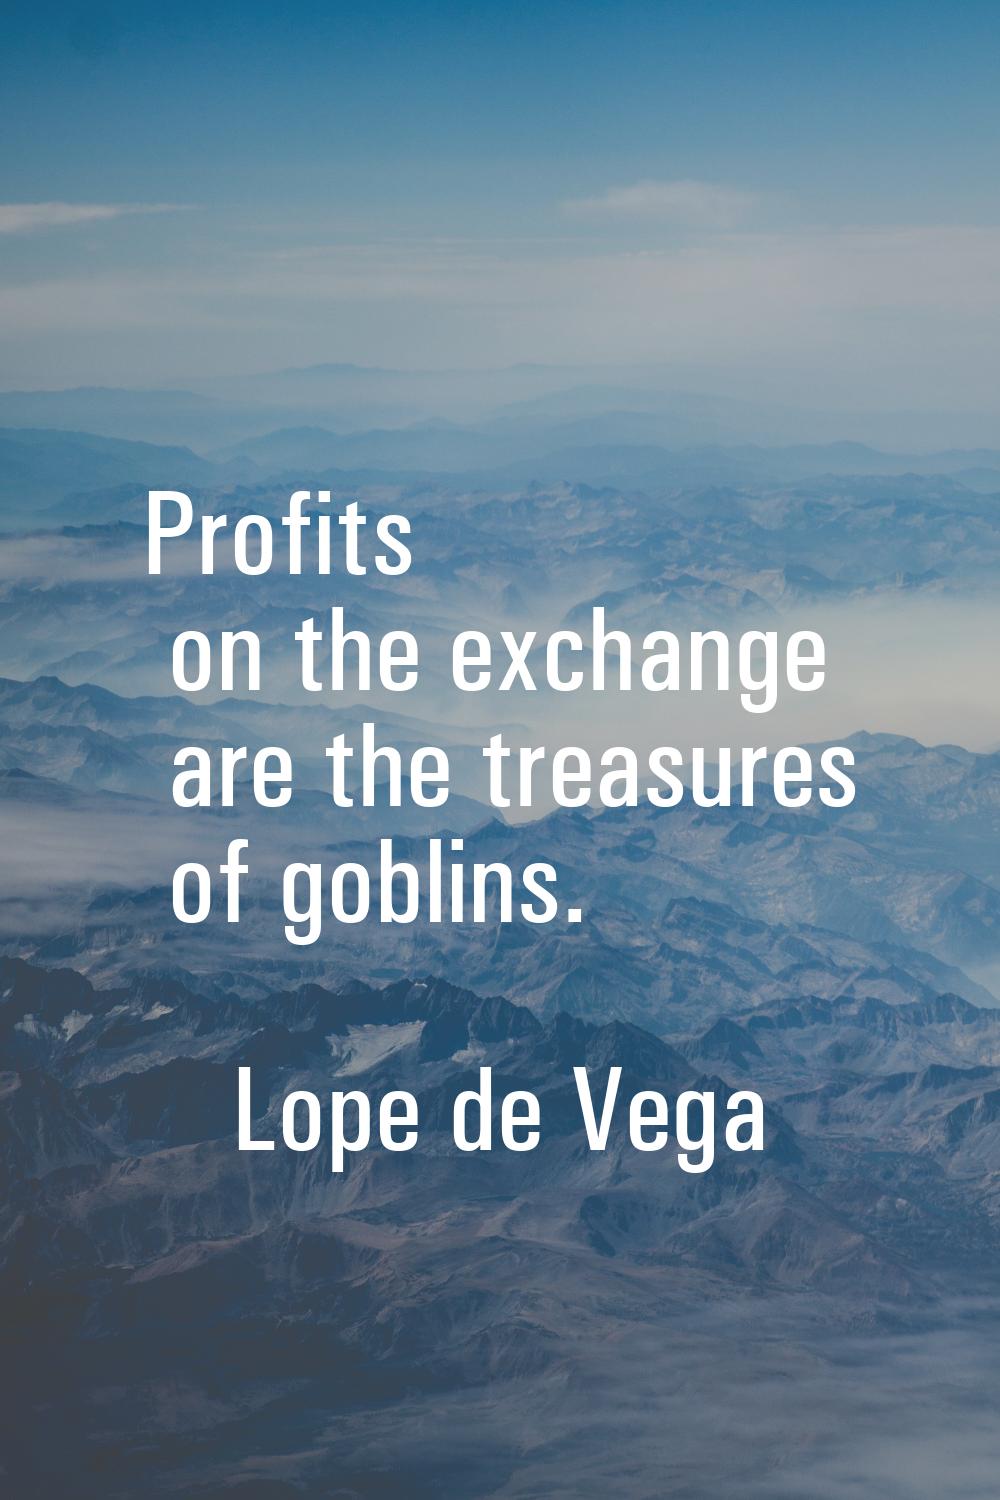 Profits on the exchange are the treasures of goblins.